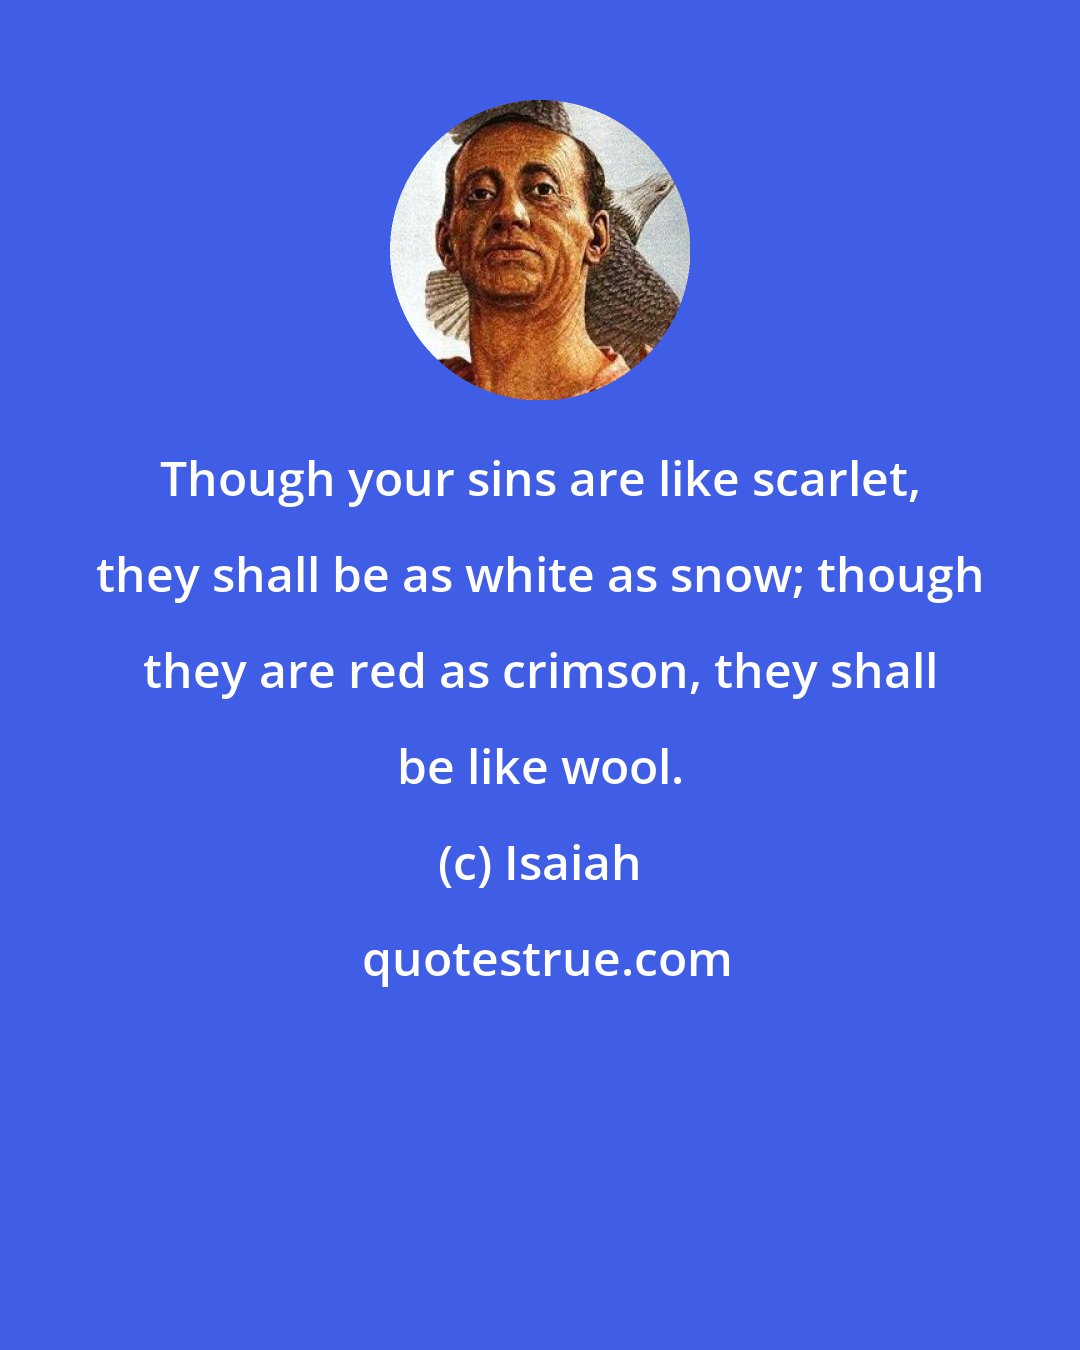 Isaiah: Though your sins are like scarlet, they shall be as white as snow; though they are red as crimson, they shall be like wool.